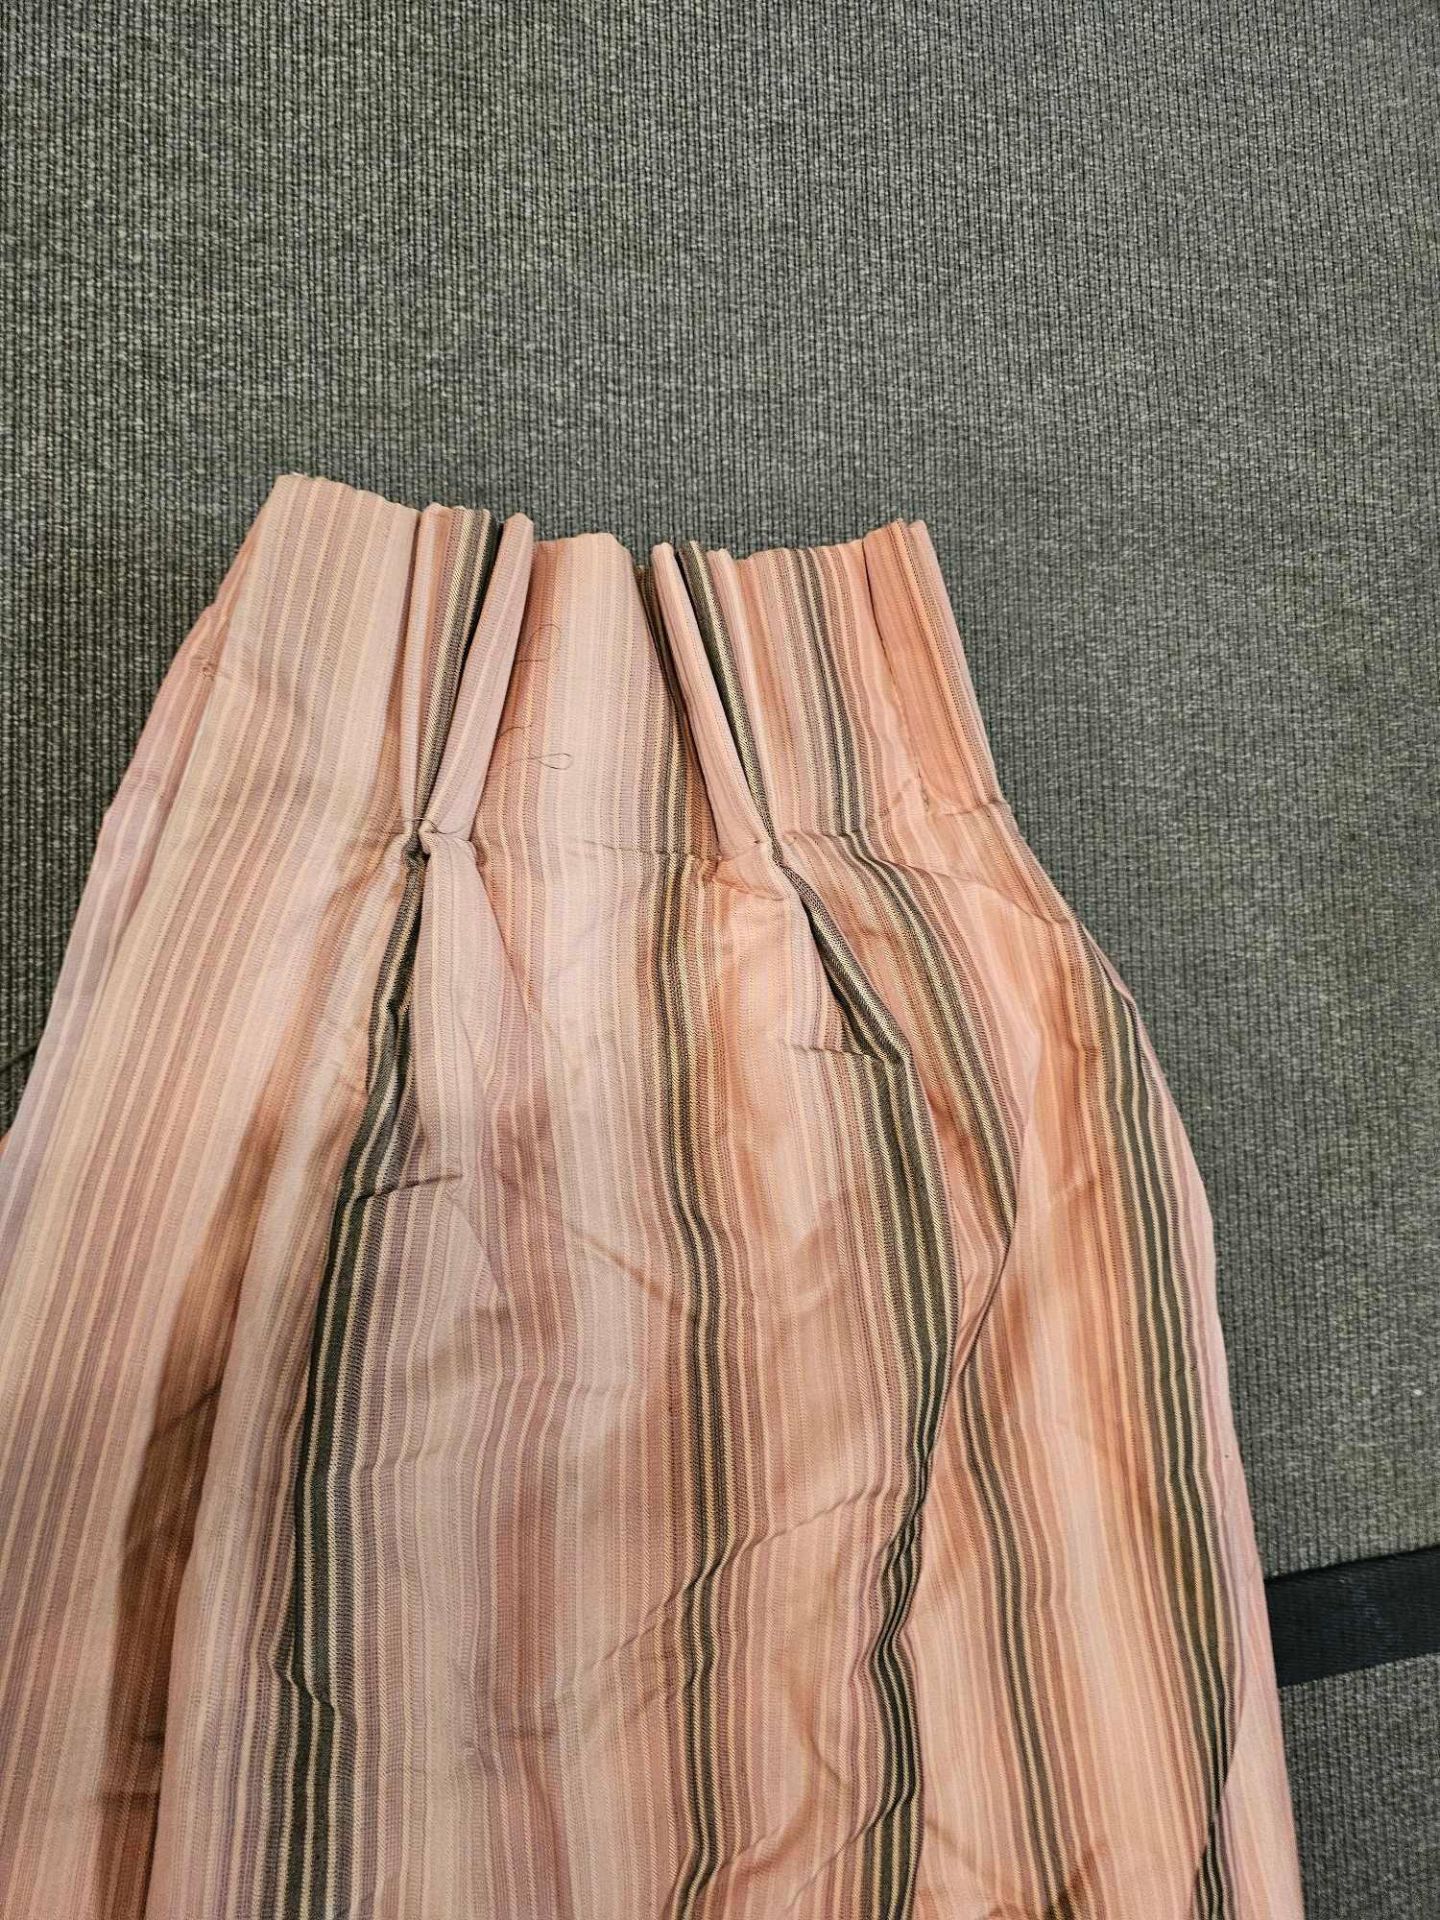 A Pair Of Drapes Pink / Grey Stripessize. 147 x 227 Ref Dorch 55 - Image 3 of 3